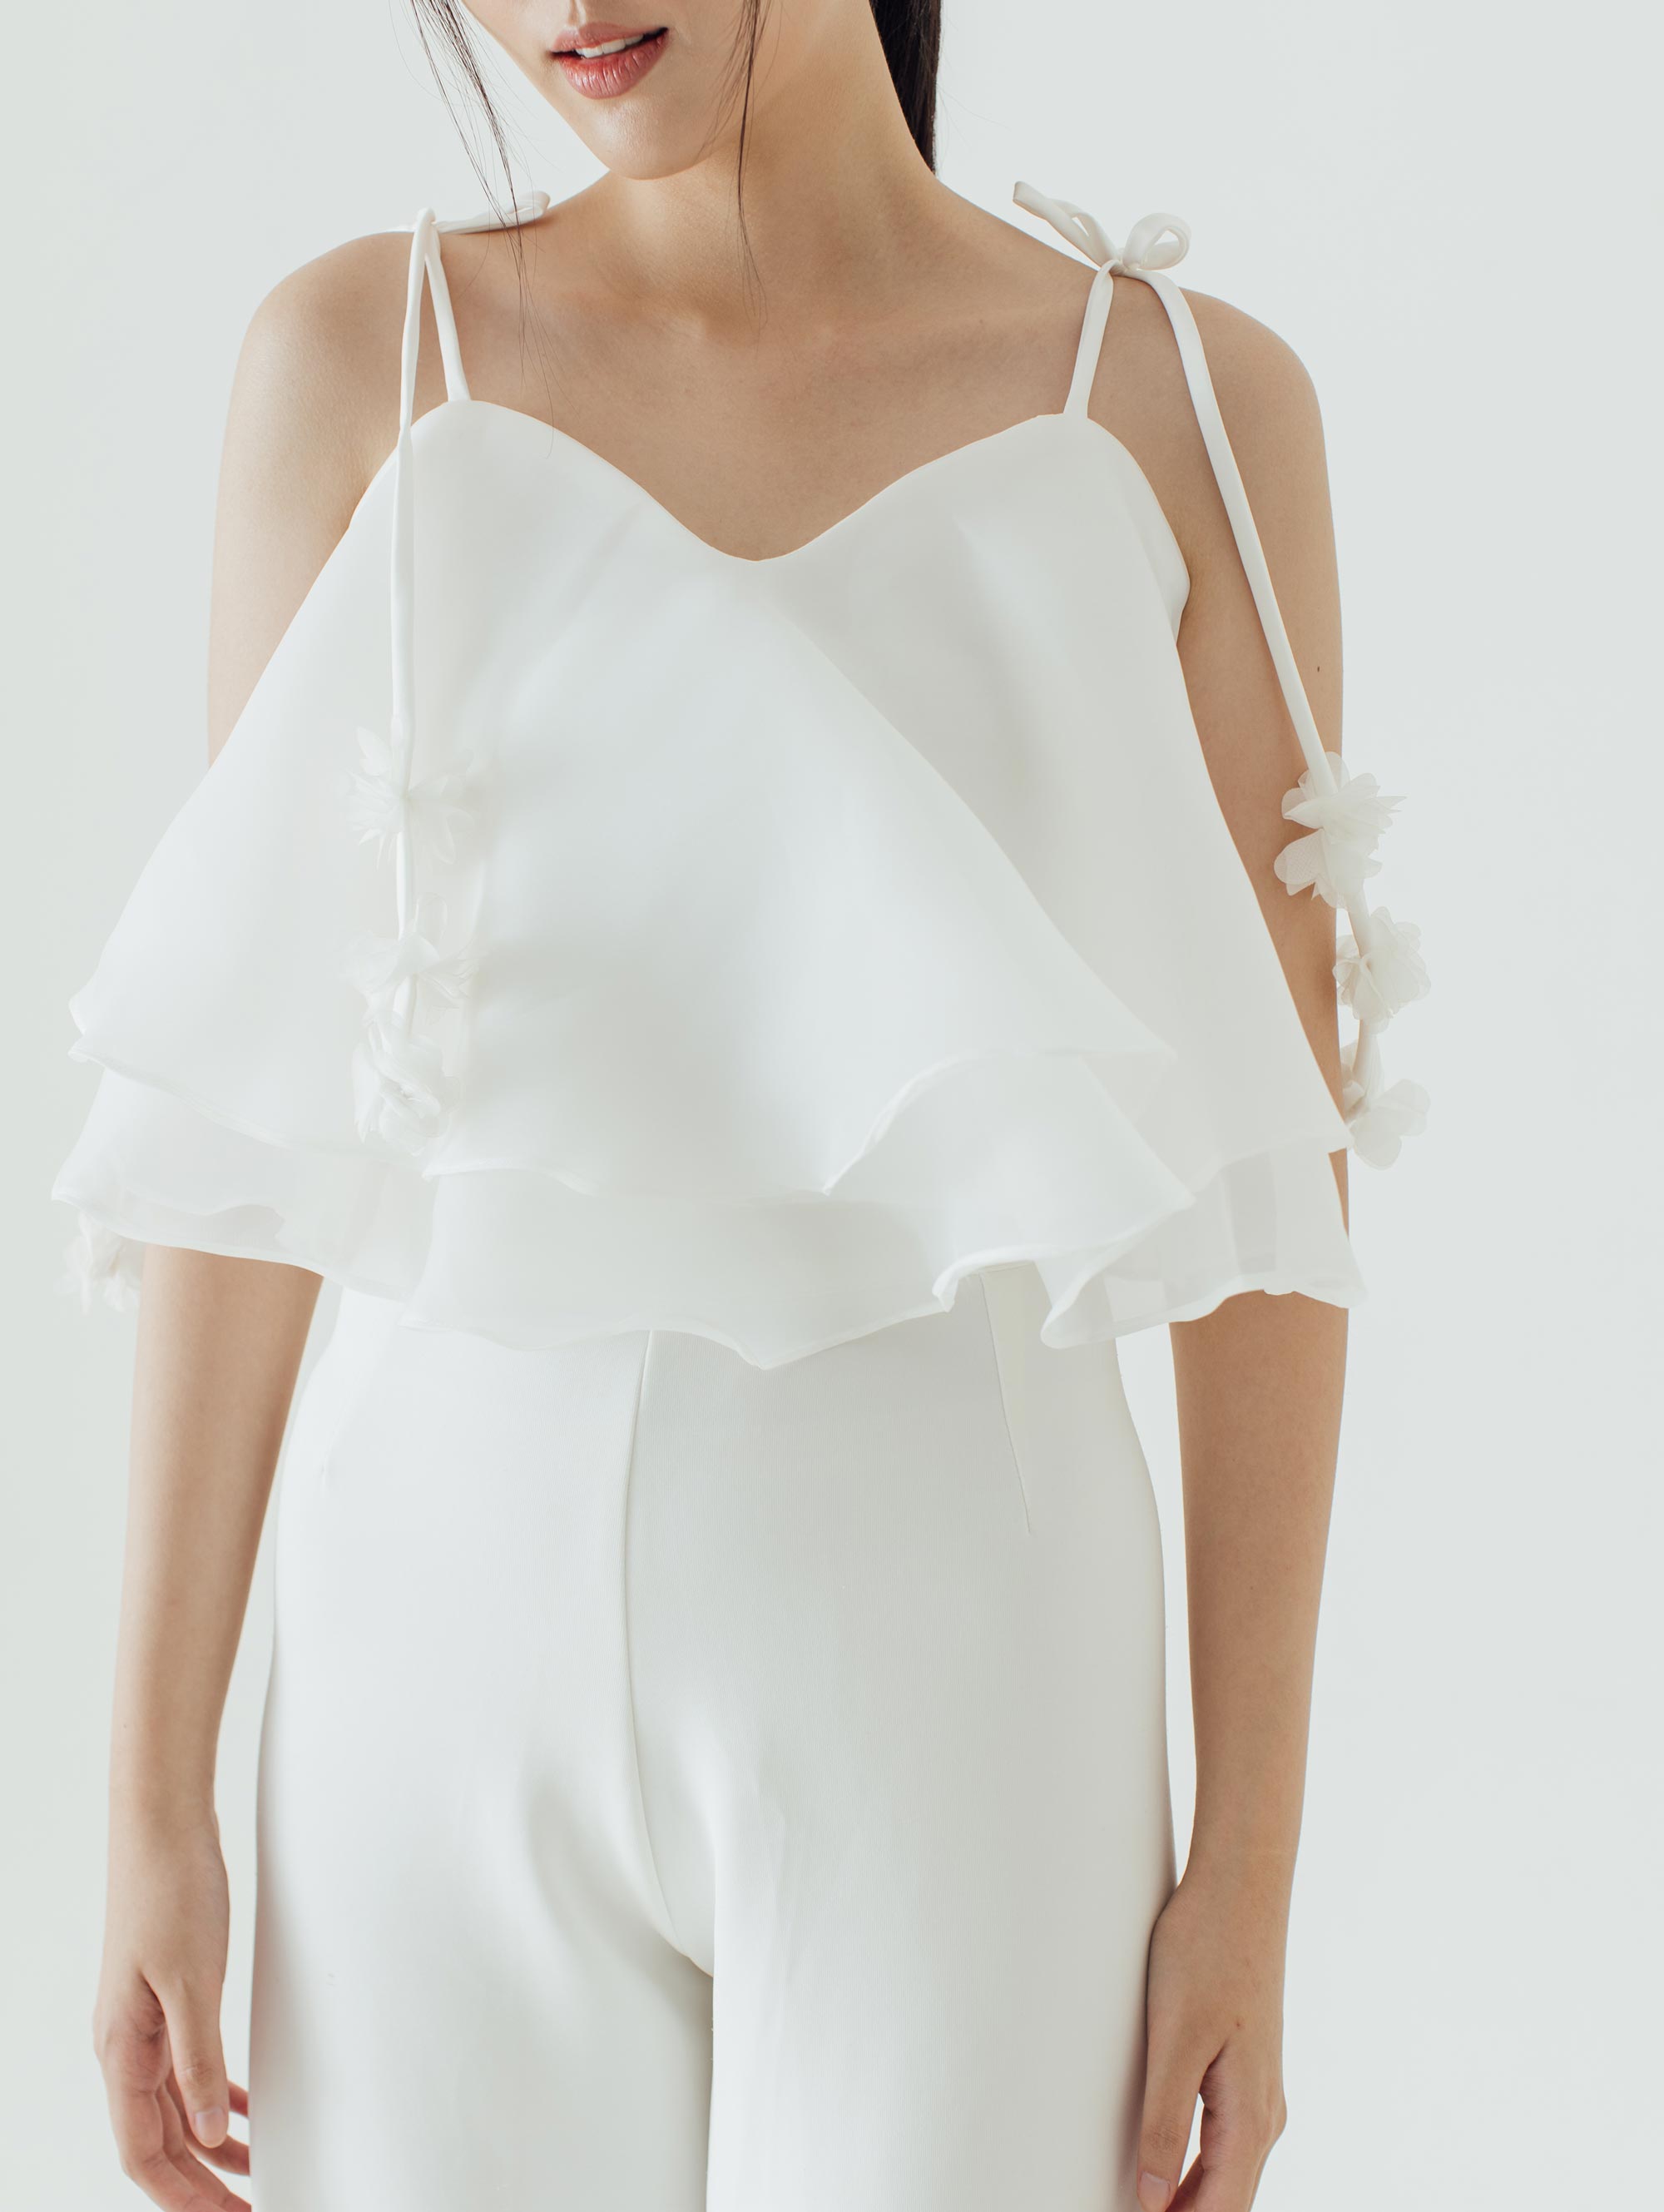 Camille Top In White (2 LEFT)